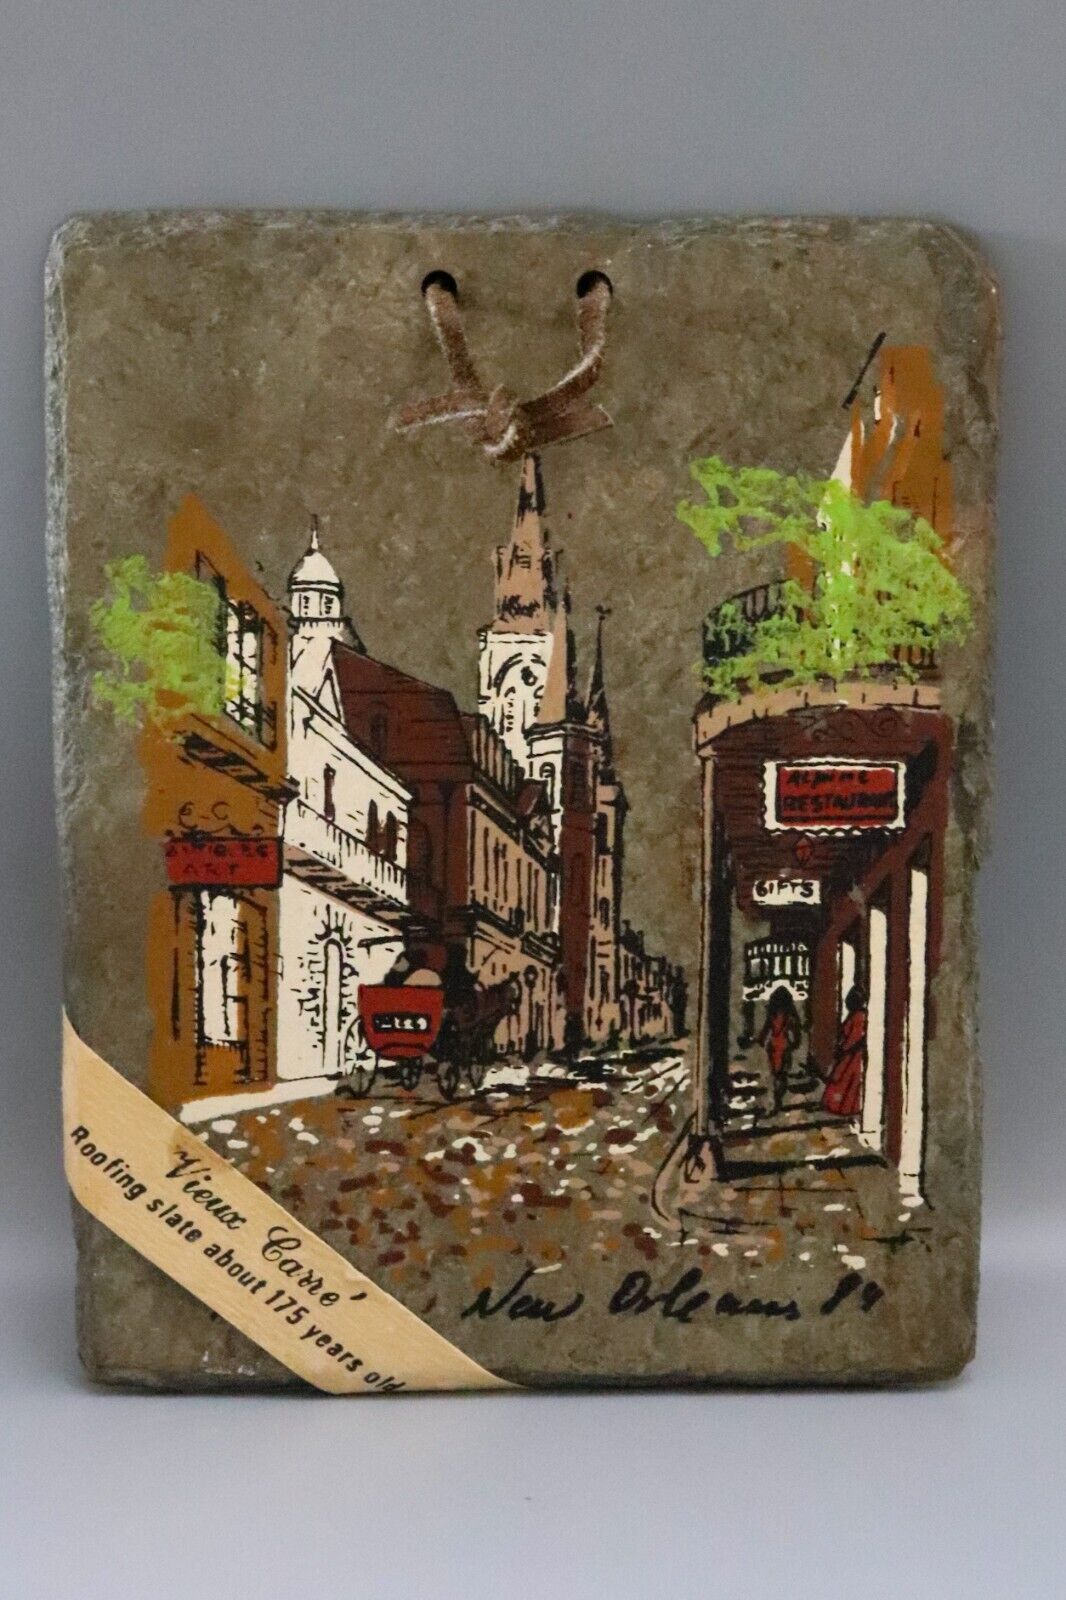 Vieux Carre\' Old Square New Orleans Roofing Slate Tile 175 Year Old Tile 